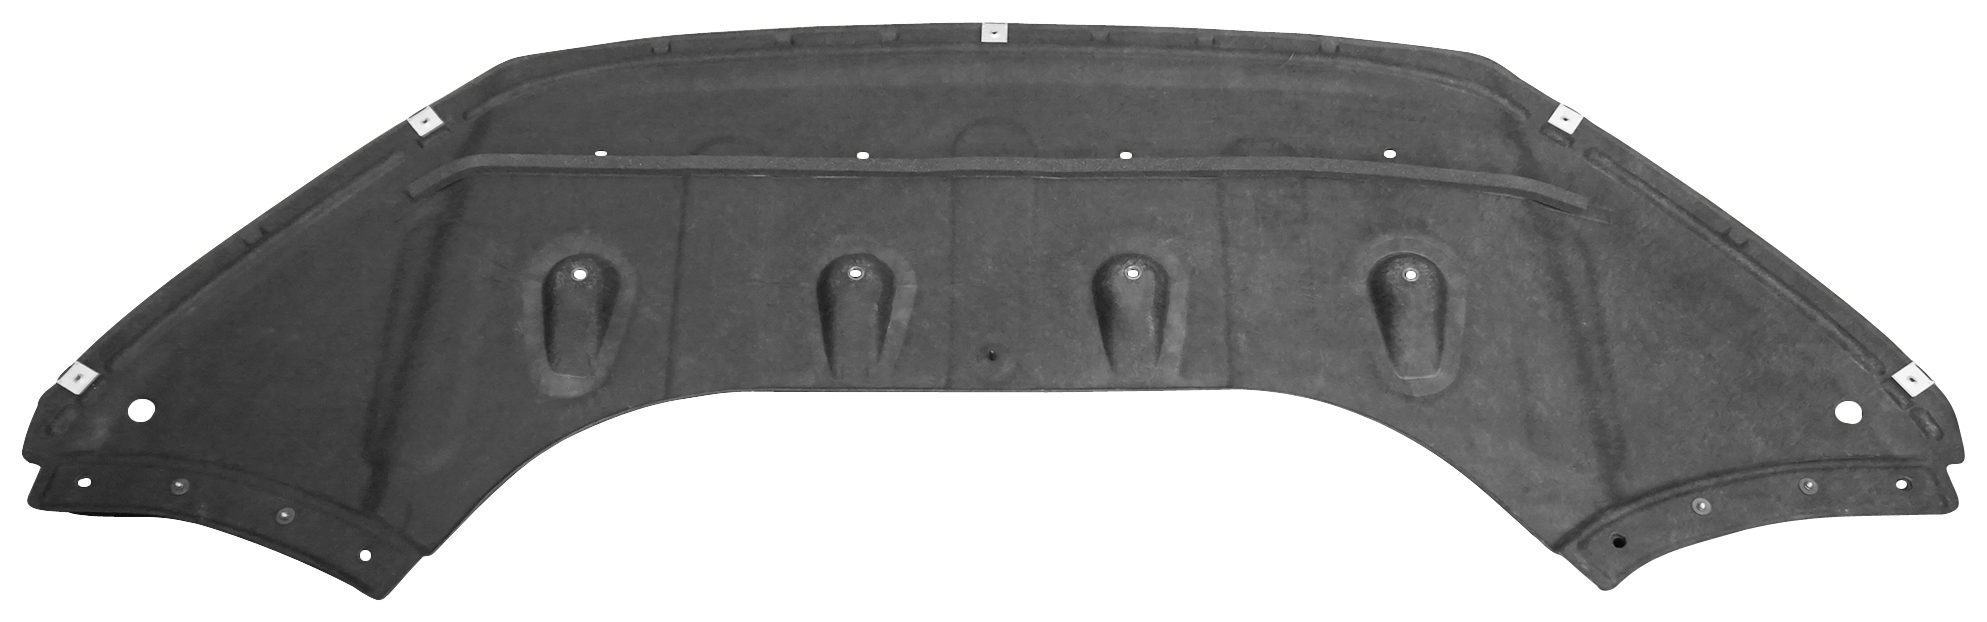 Aftermarket UNDER ENGINE COVERS for HYUNDAI - SONATA, SONATA,18-19,Lower engine cover